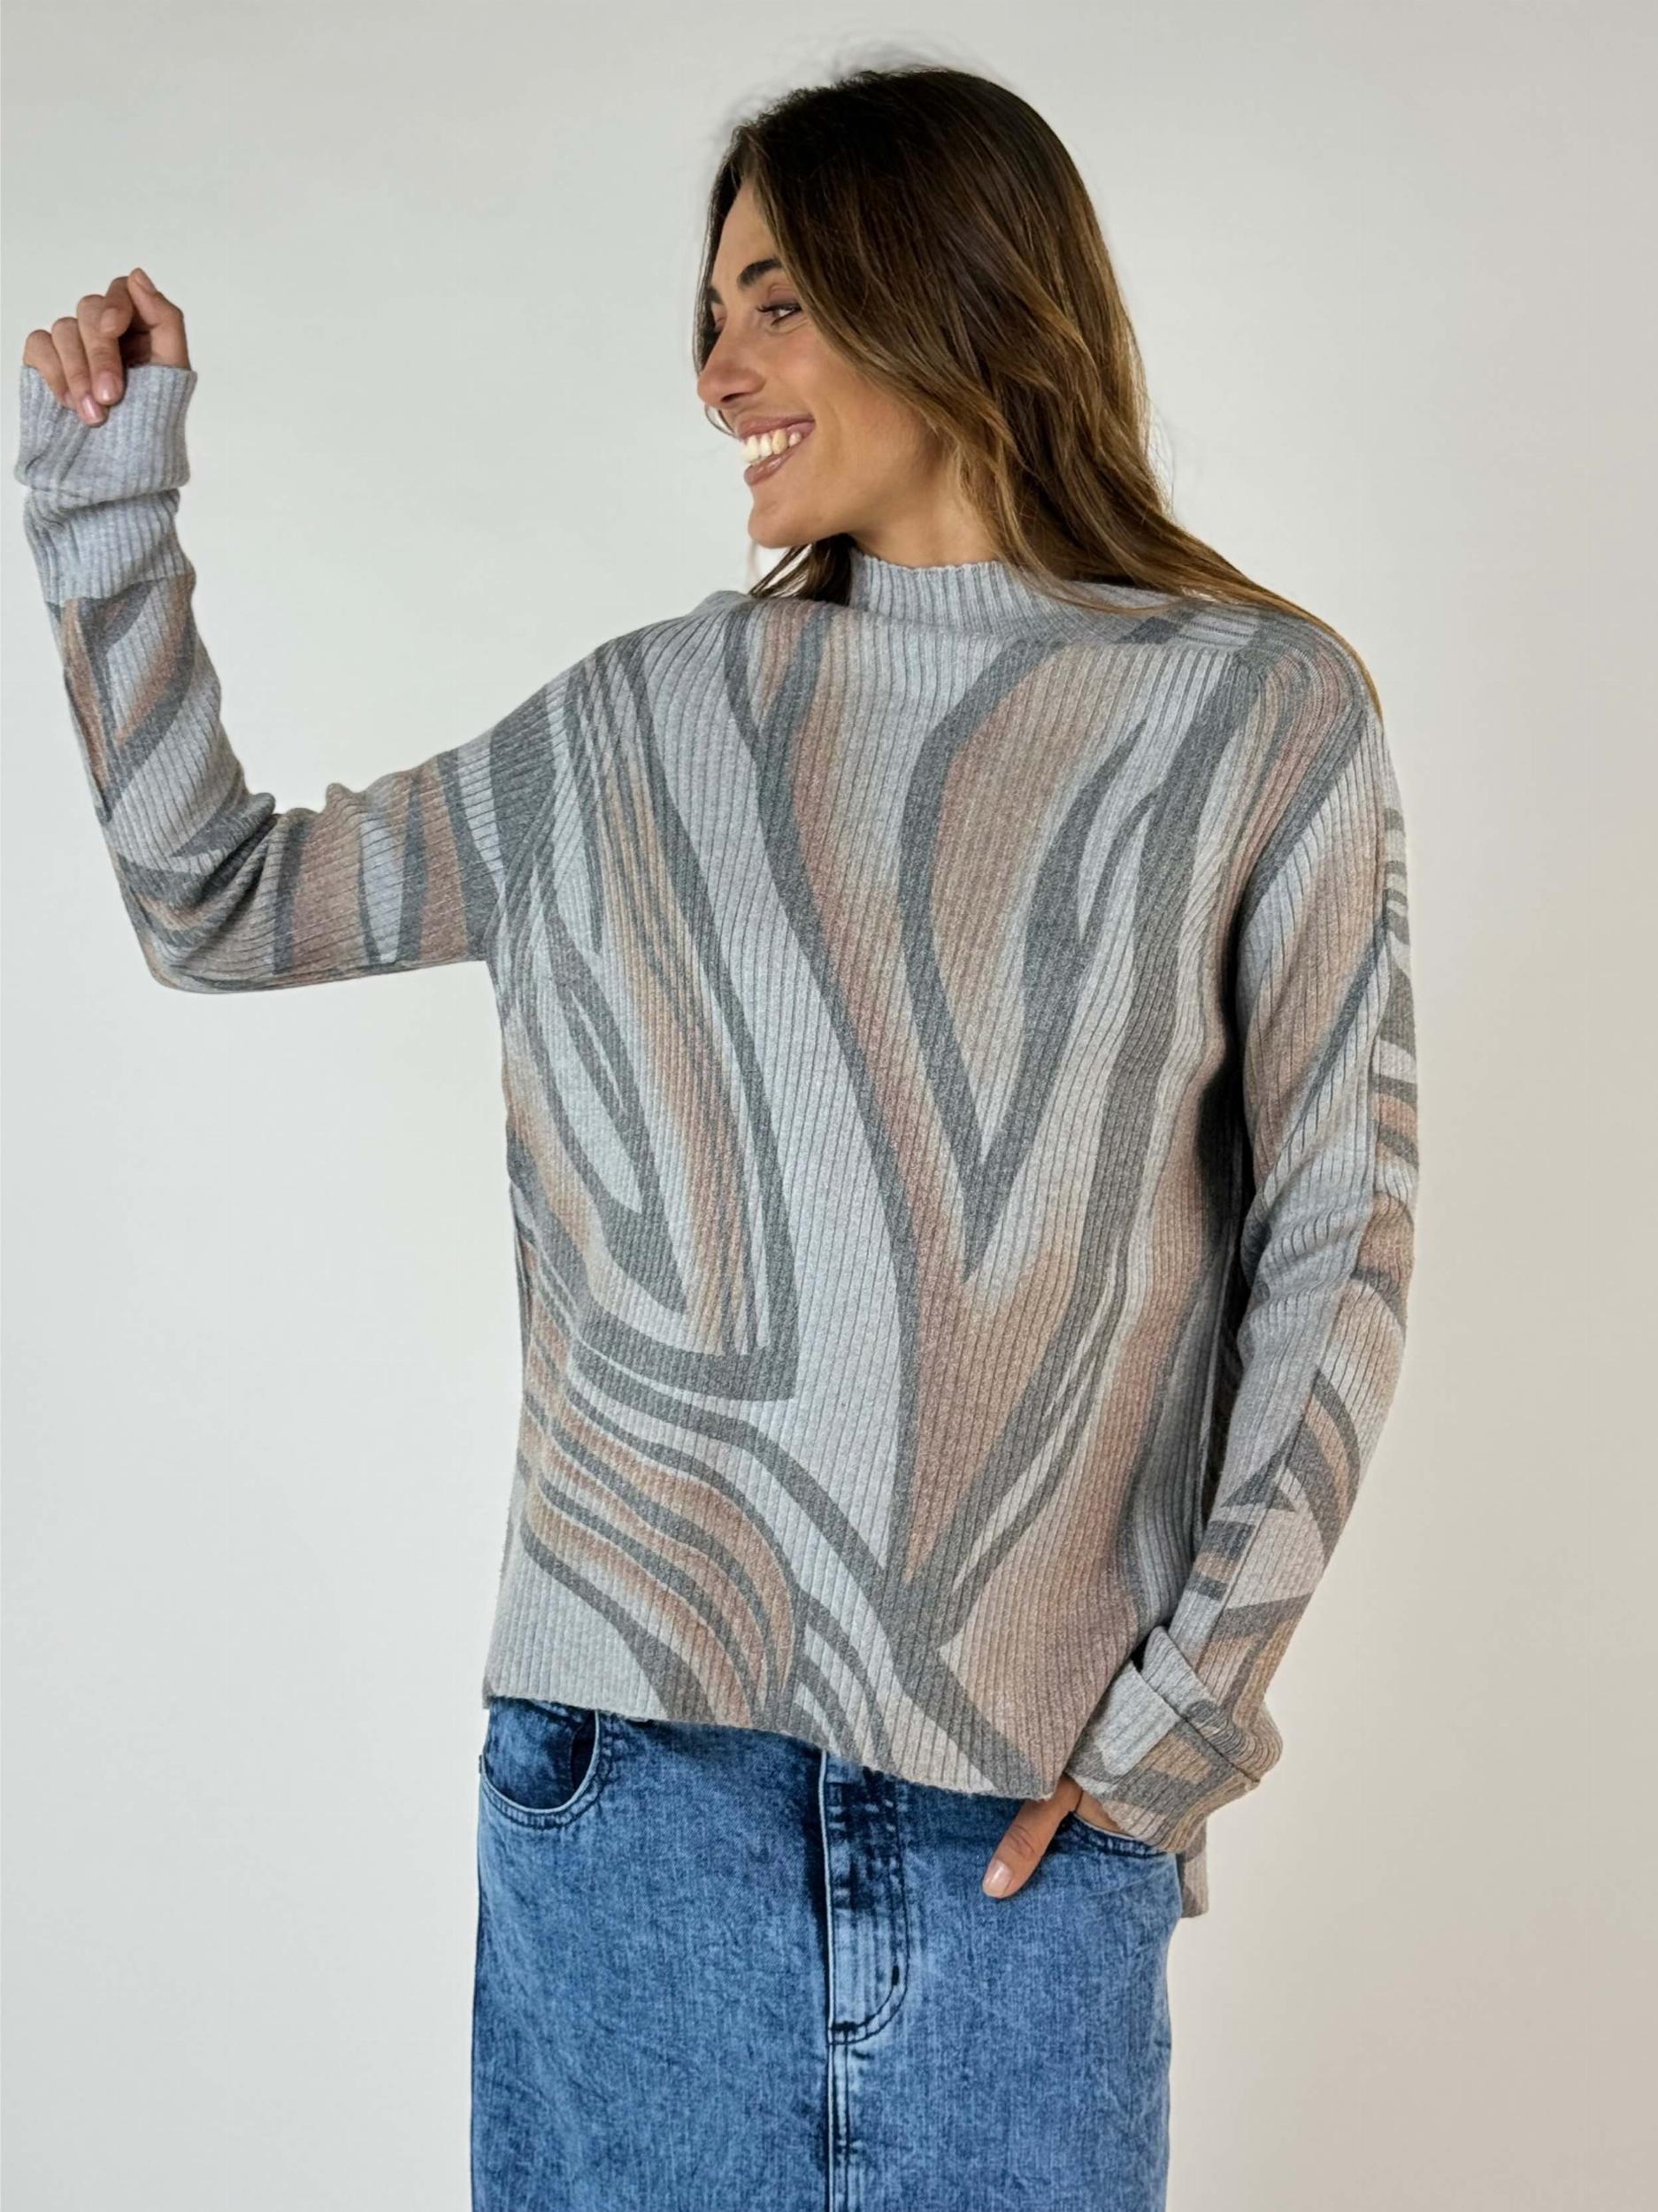 SWEATER NIVES gris talle unico